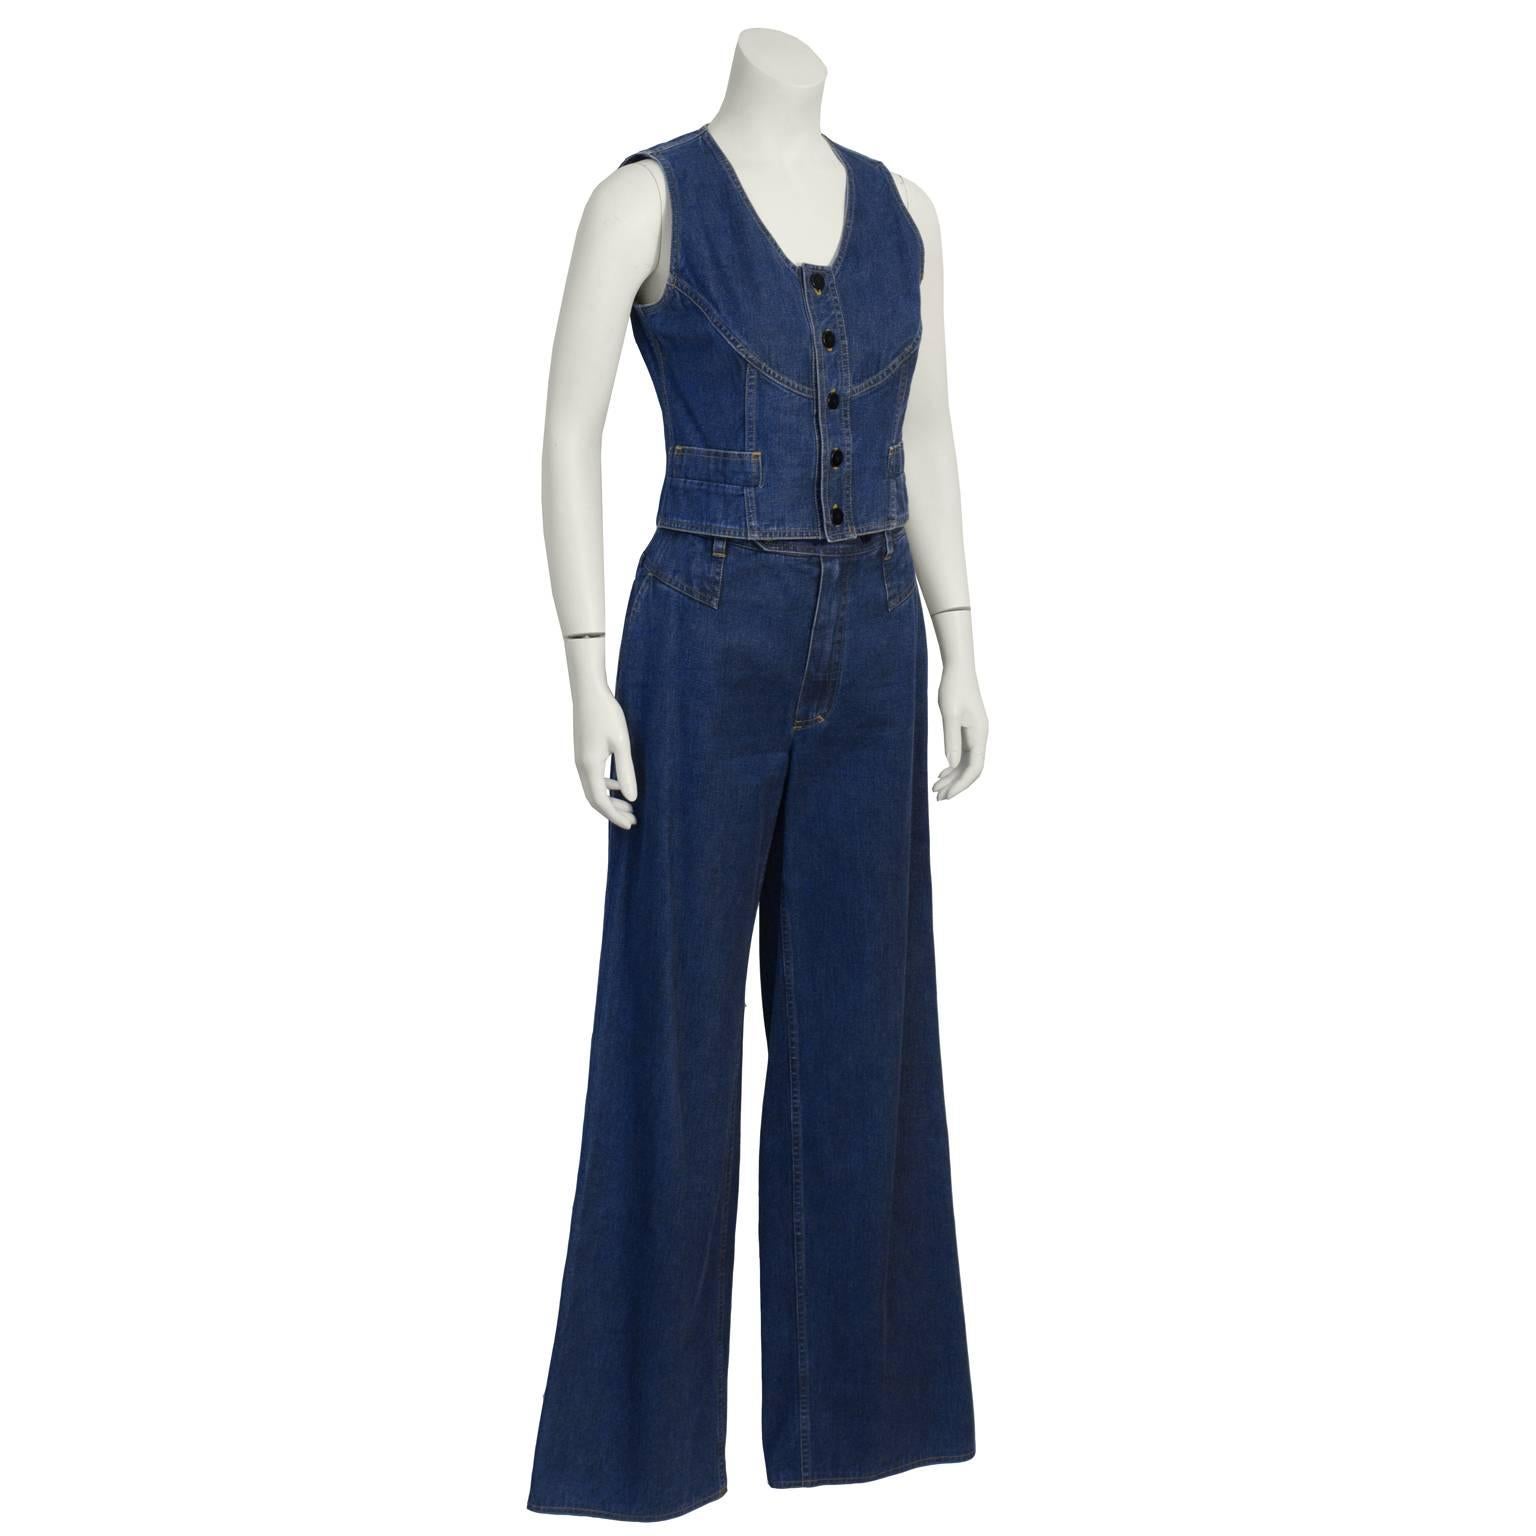 The best Chanel denim set from the early 1990's. Vest is waist length and has a deep V cut. Two flap pockets at the fitted waist. Front button closure, with copper tone metal buttons. Fabulous denim pants are high waisted and wide flared. Excellent